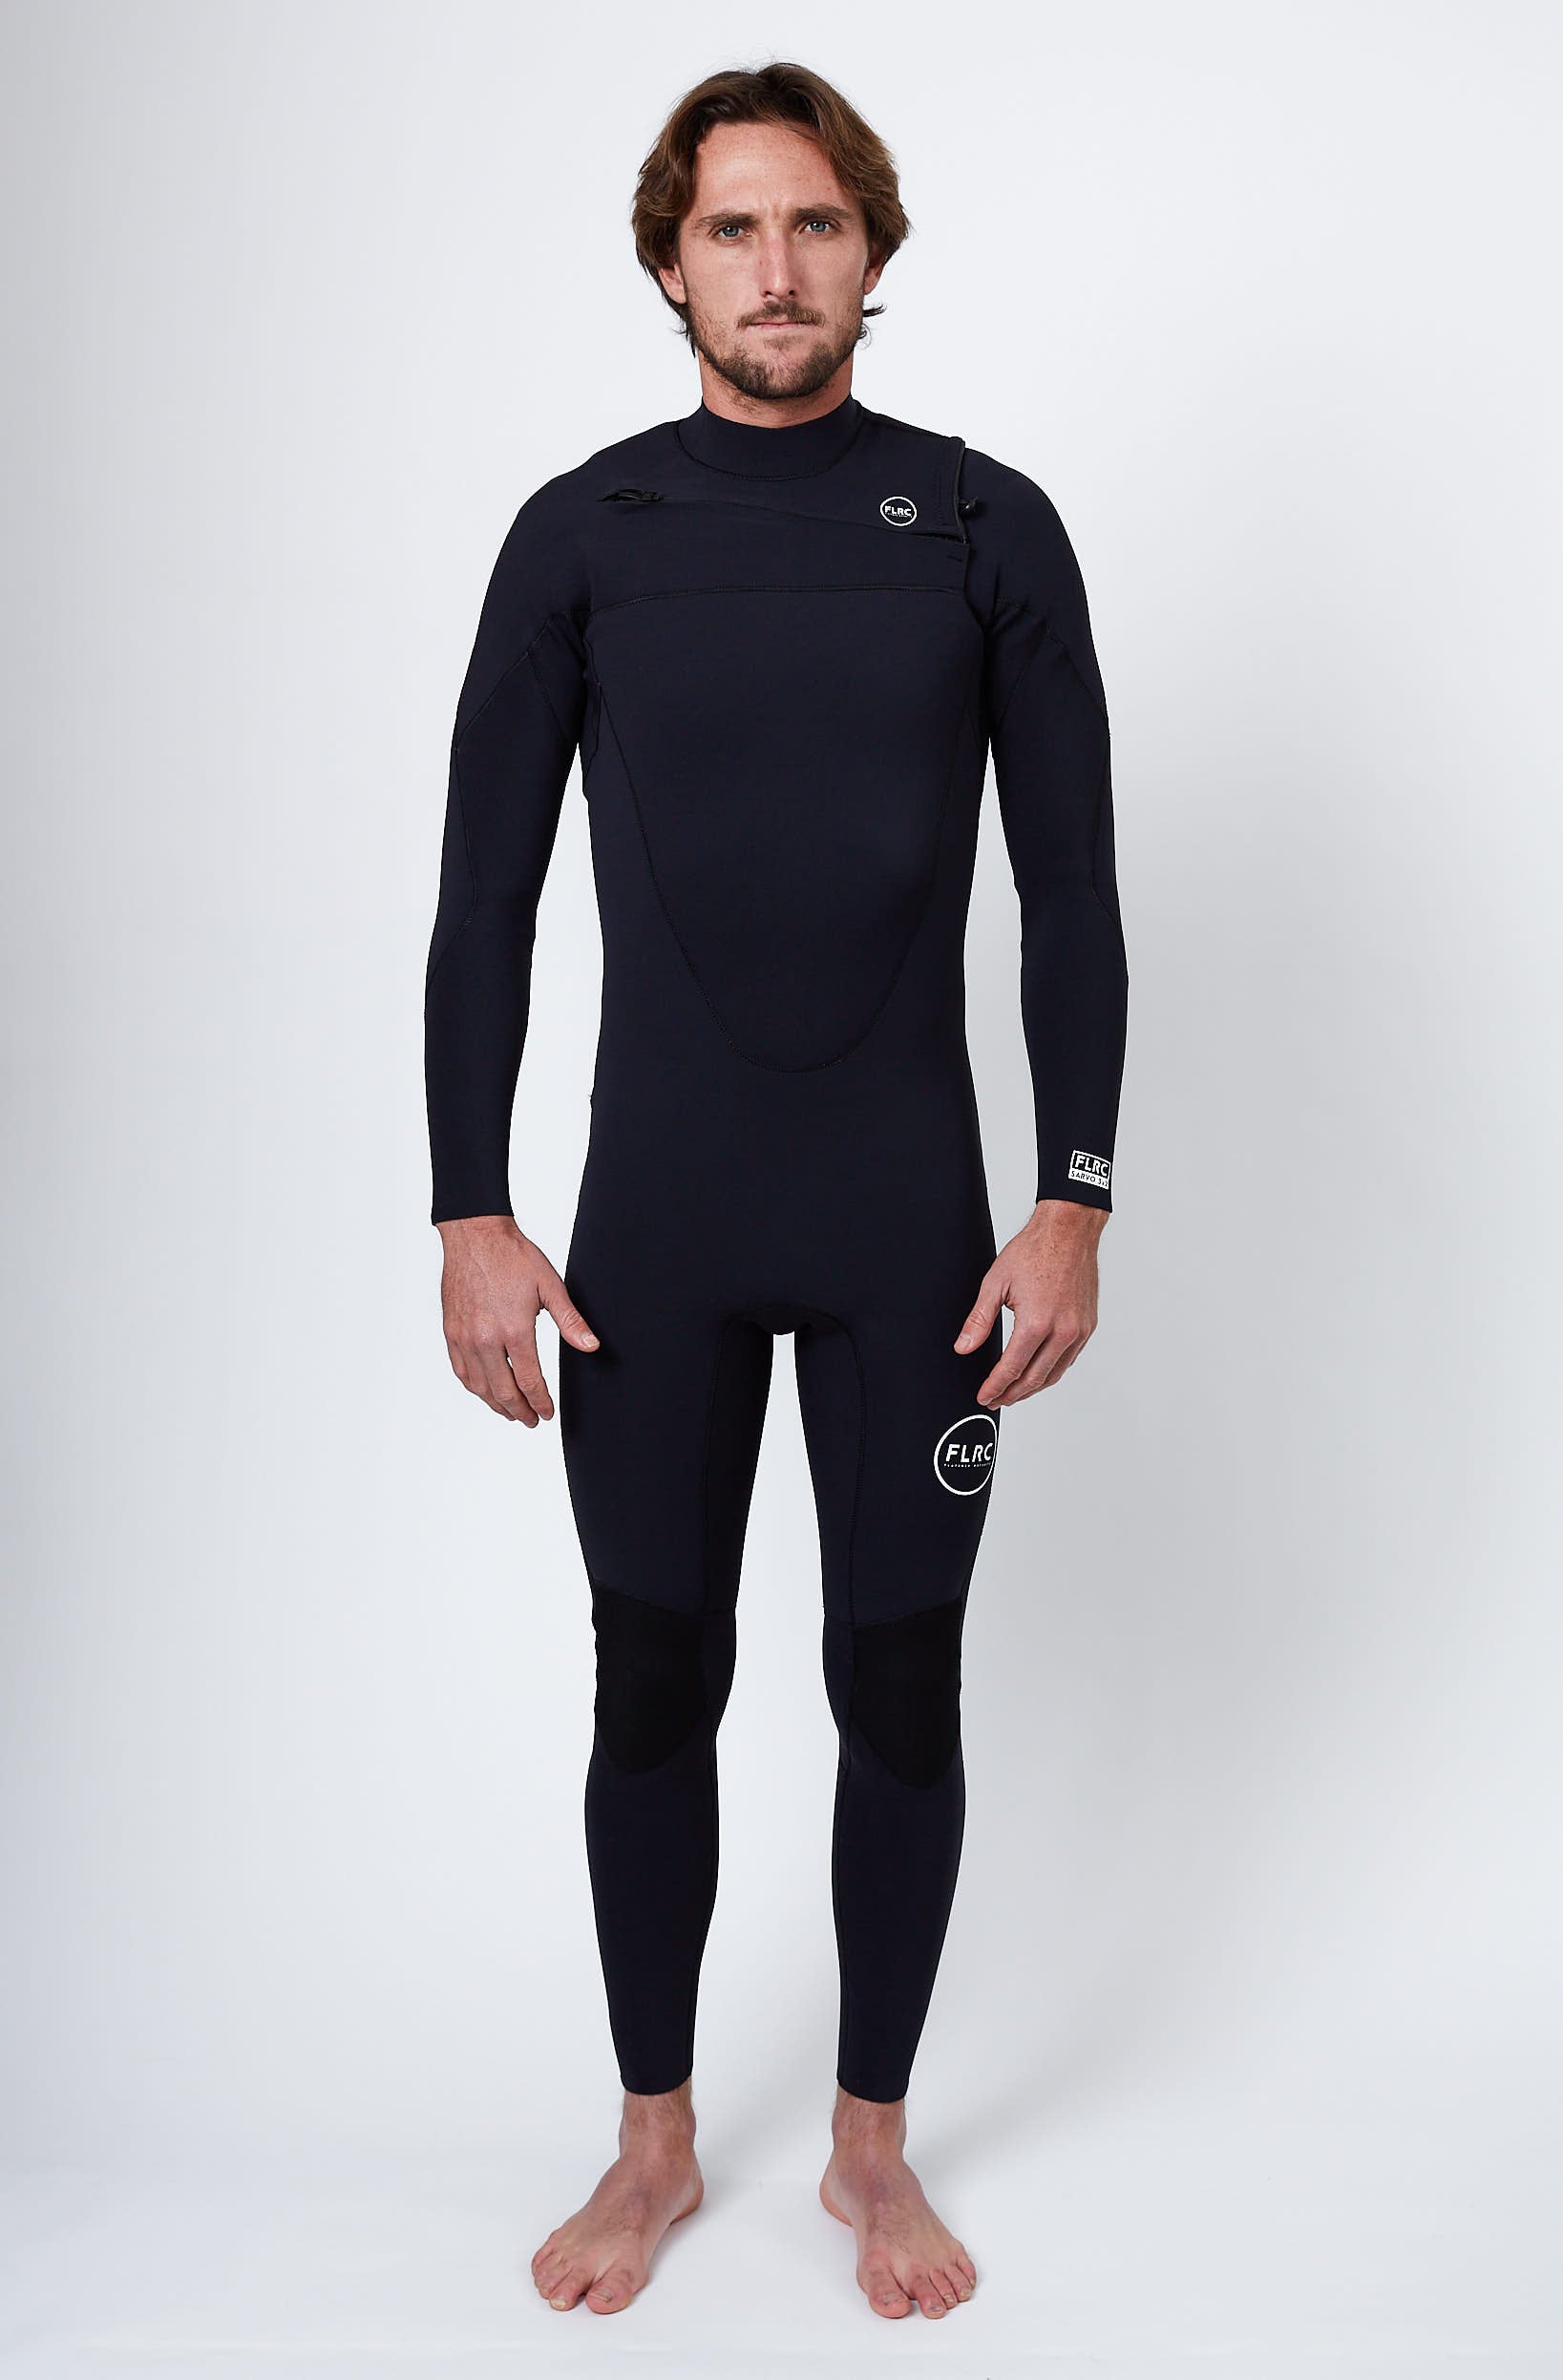 Rip Curl  “Rip Curl Wetsuits were the icon when I was growing up